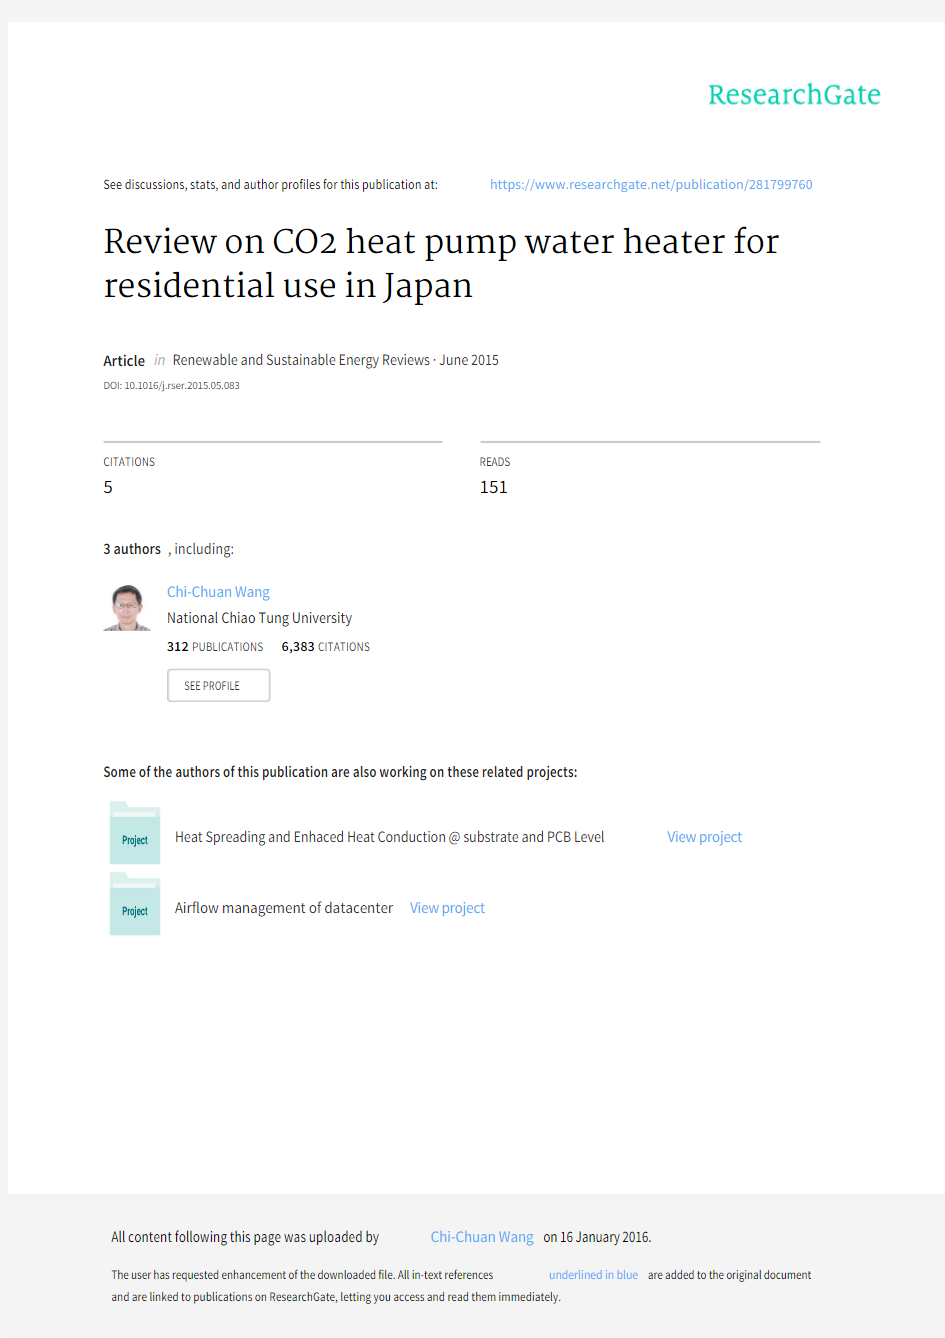 Review on CO2 heat pump water heater for residential use in Japan